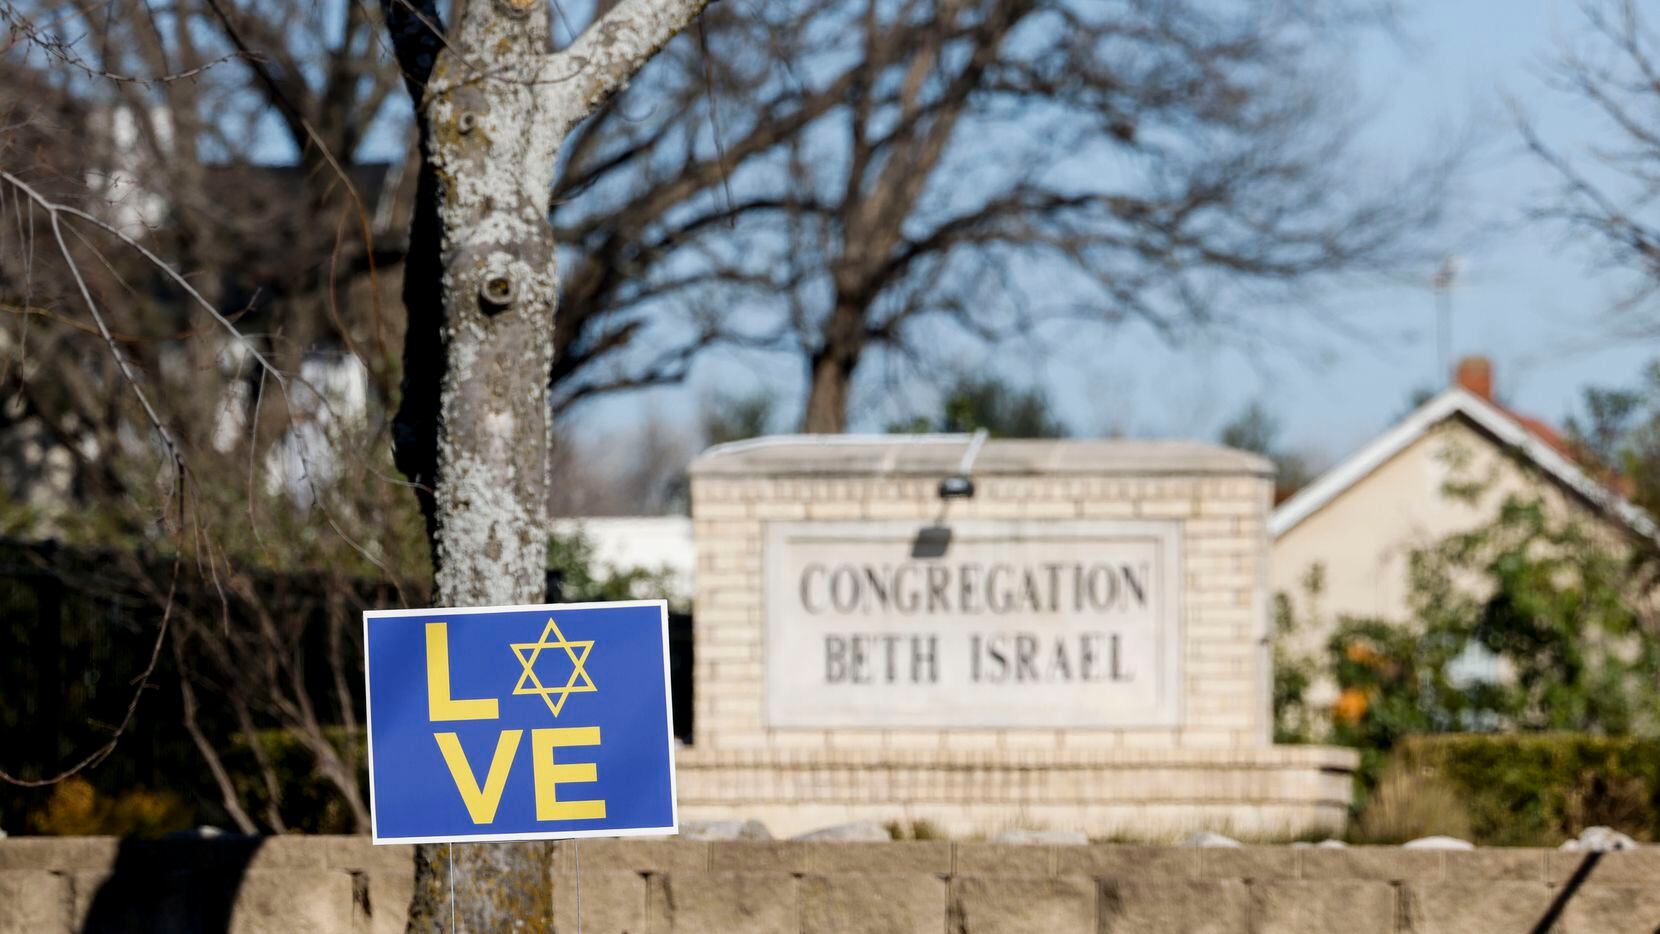 A sign outside of the Congregation Beth Israel synagogue in Colleyville.